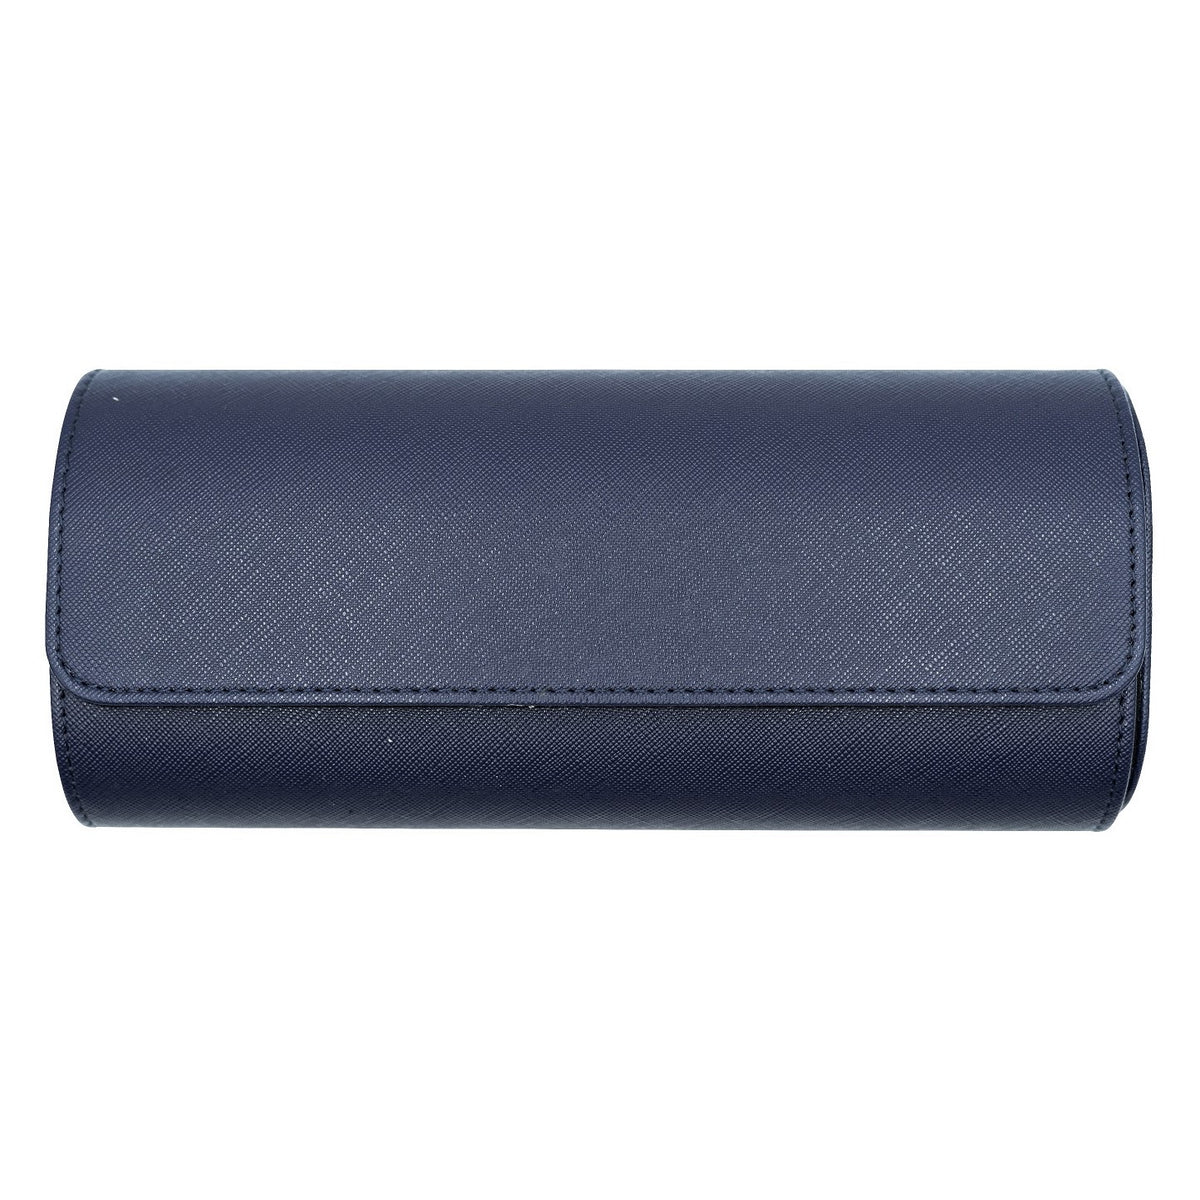 Saffiano Leather Watch Case in Navy (3 Slots) - Nomad Watch Works MY